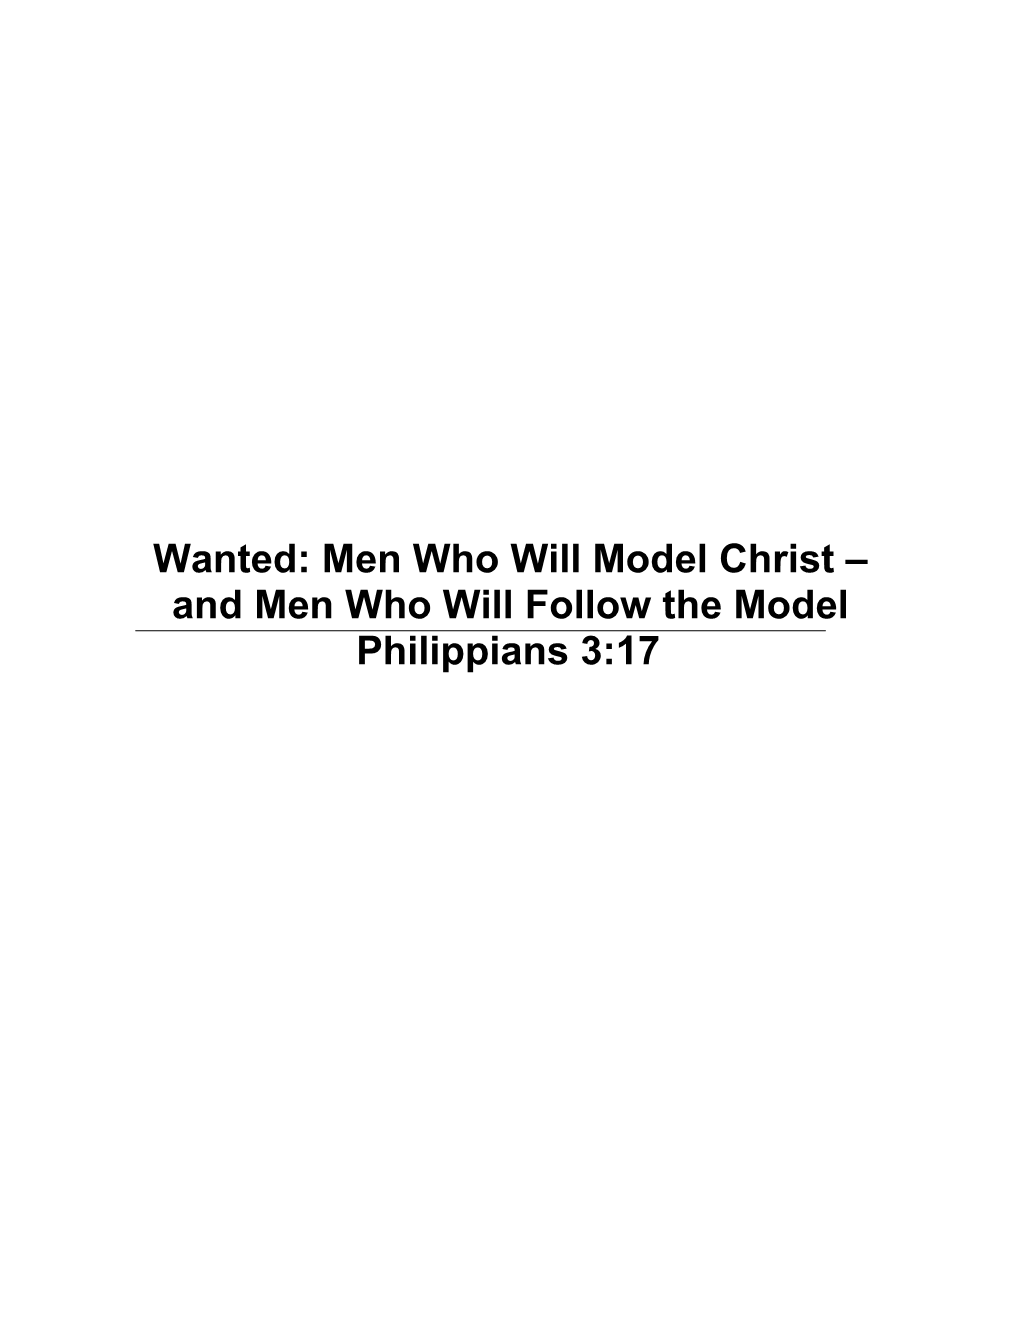 Wanted: Men Who Will Model Christ and Men Who Will Follow the Model